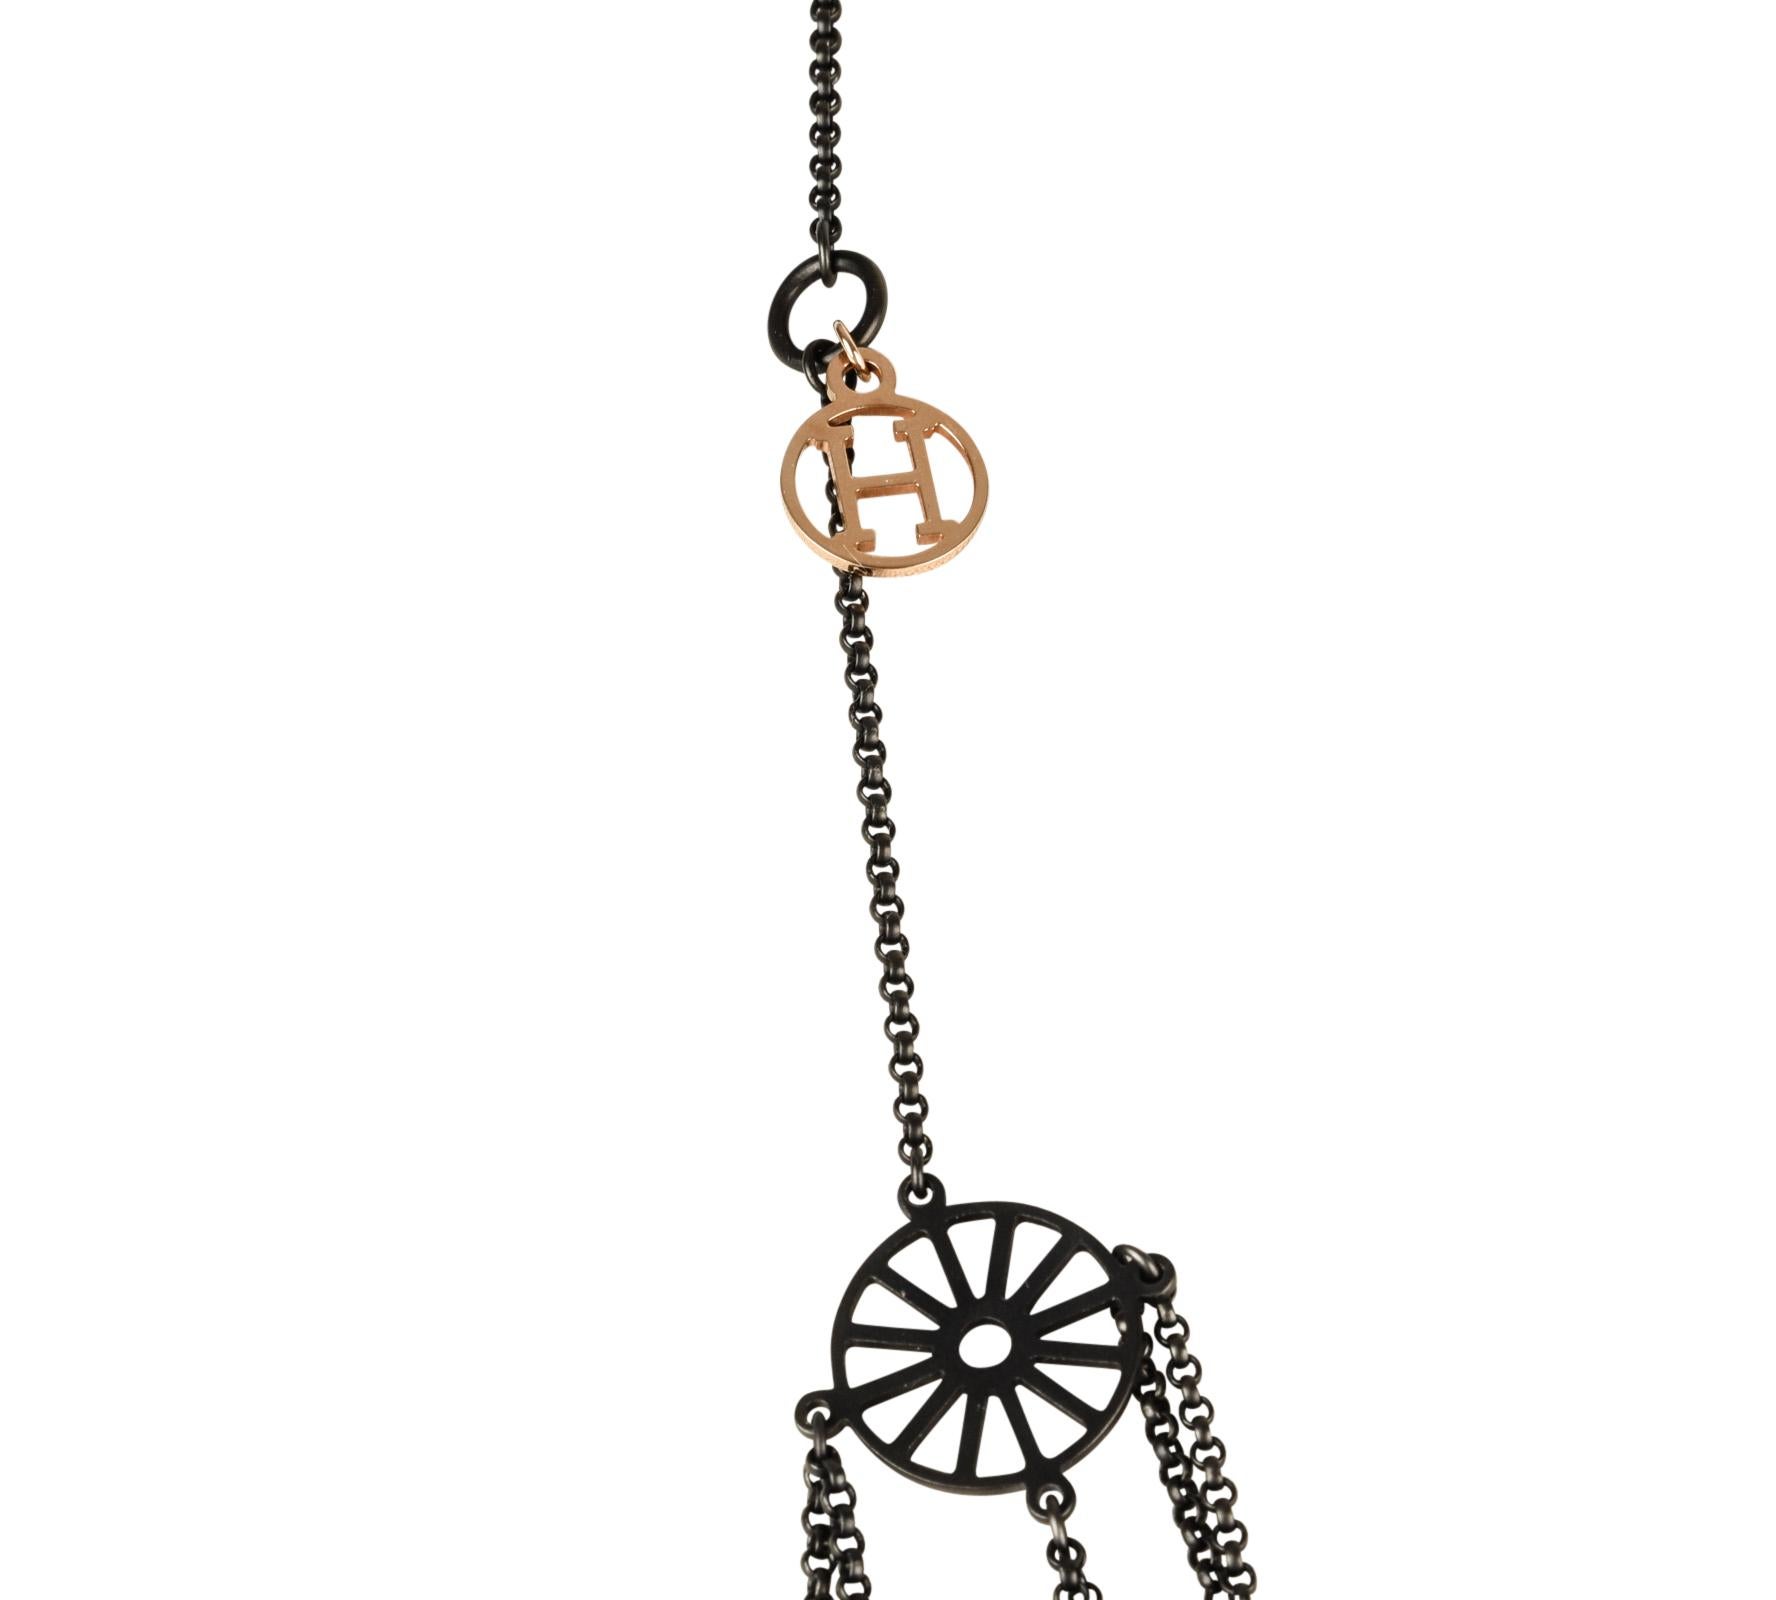 Mightychic offers a limited edition Hermes Crazy Caleche necklace featured Blackened Silver and 18K Rose Gold.
Finely crafted deconstructed carriage charms.
T shaped clasp.
Beautiful and unmistakably Hermes.
Comes with gift box and signature Hermes